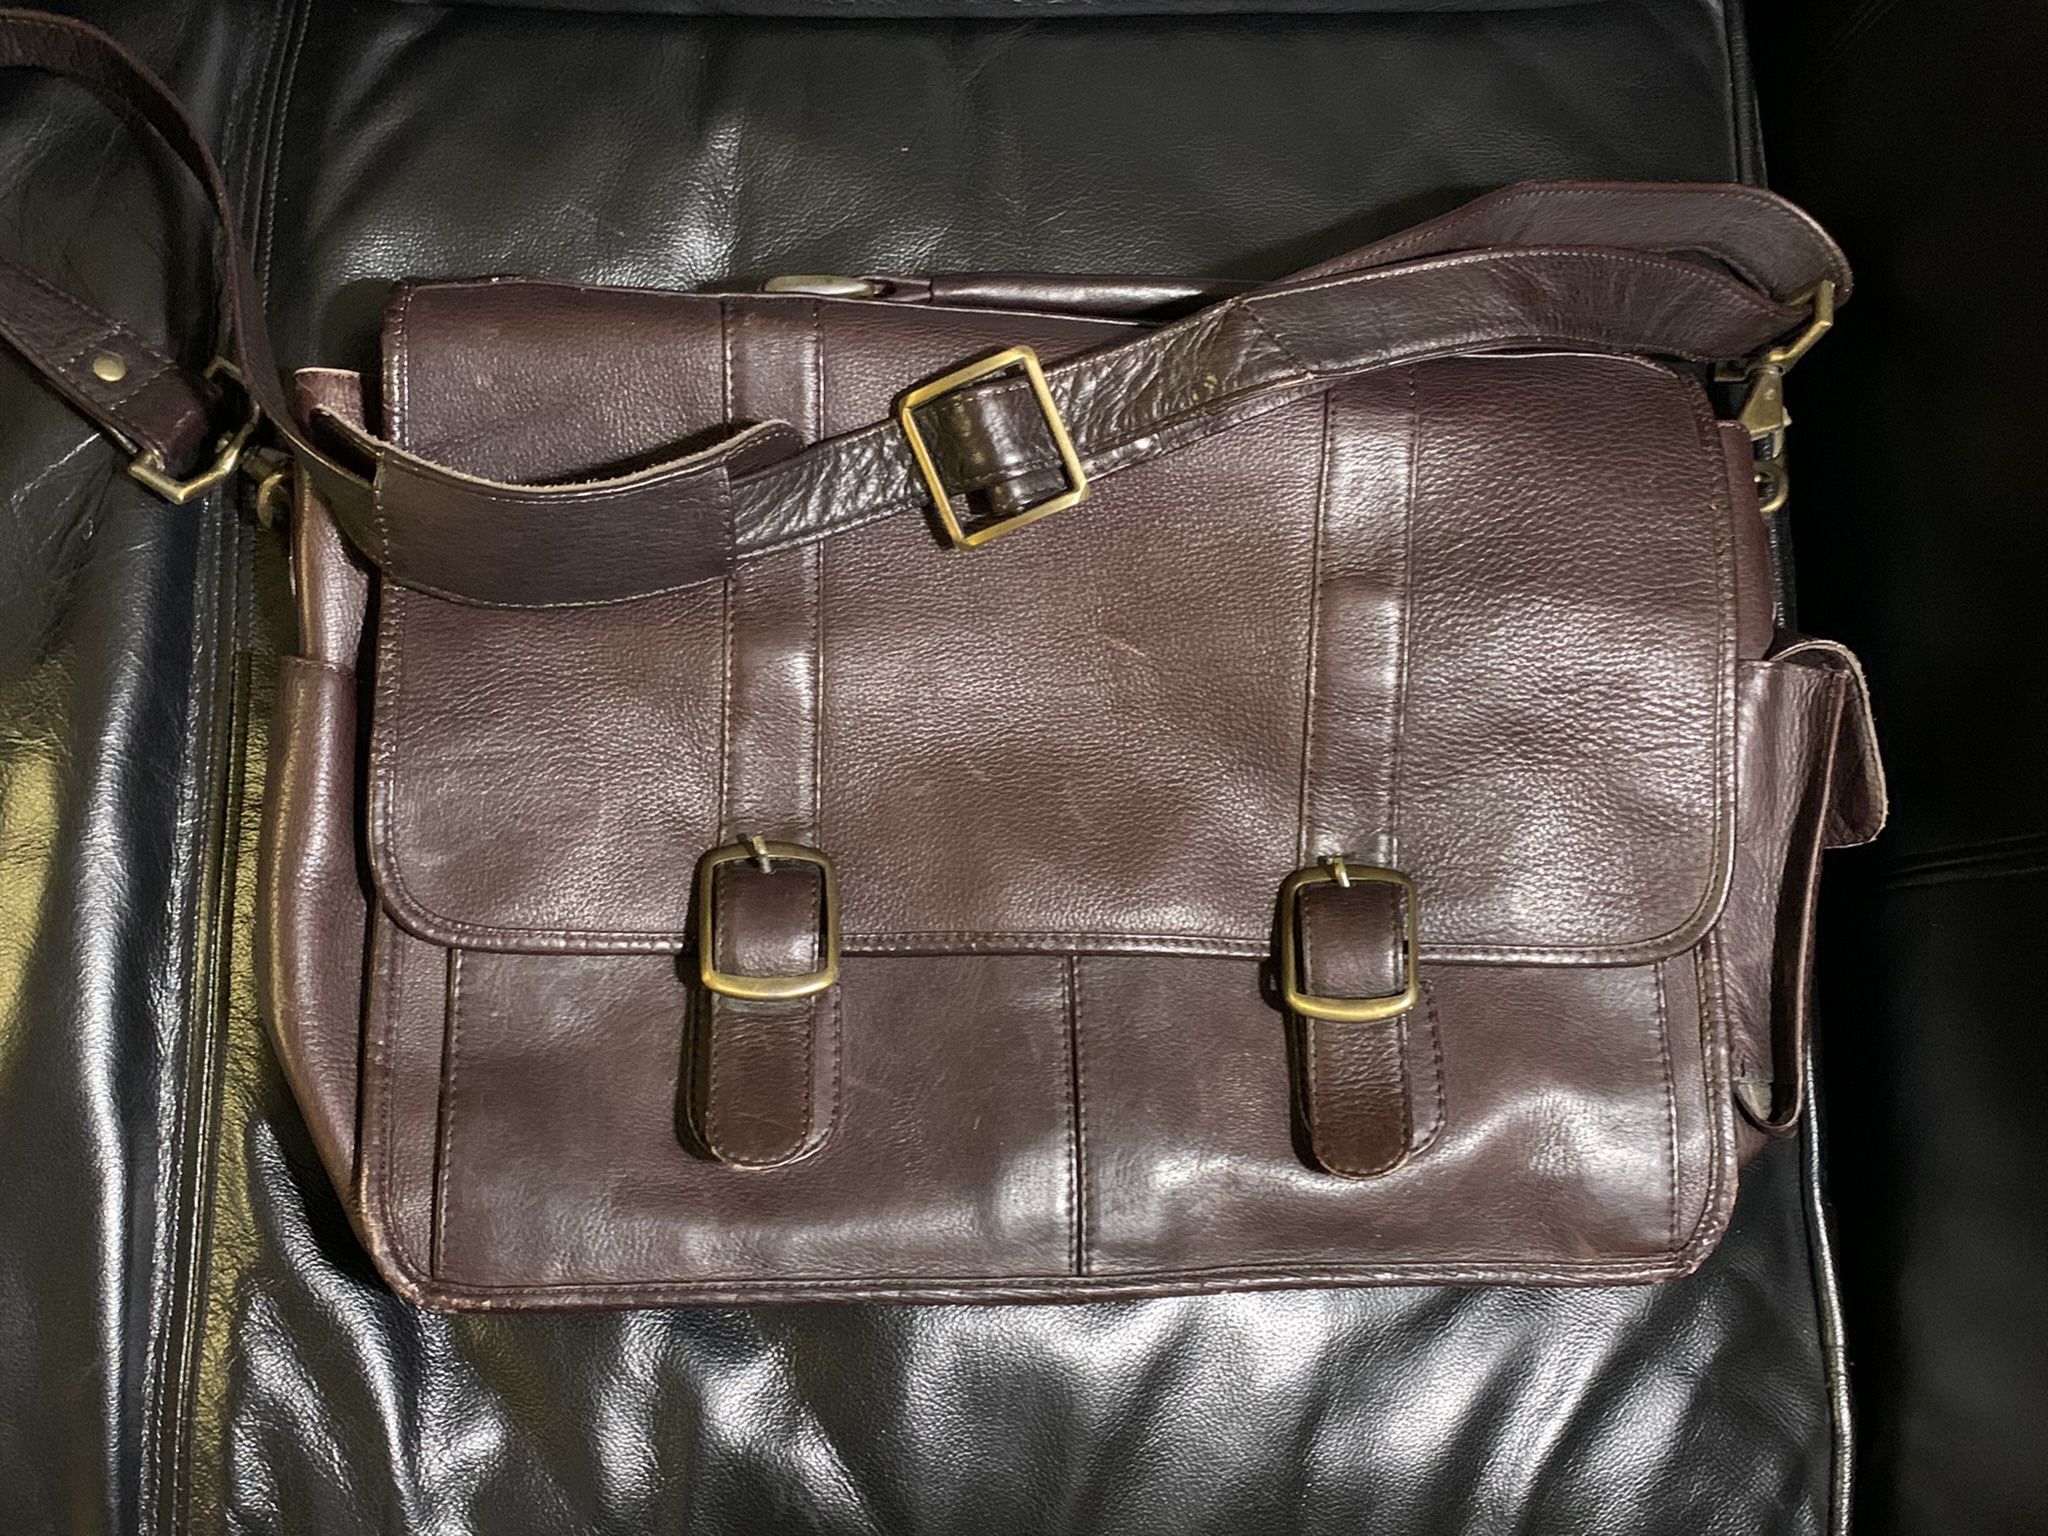 Gorgeous  Clava Leather Briefcase / Messenger Bag With Padded Laptop Compartment, Phone Holder, Pen Holders, Business Card Compartment Etc, Orig $285